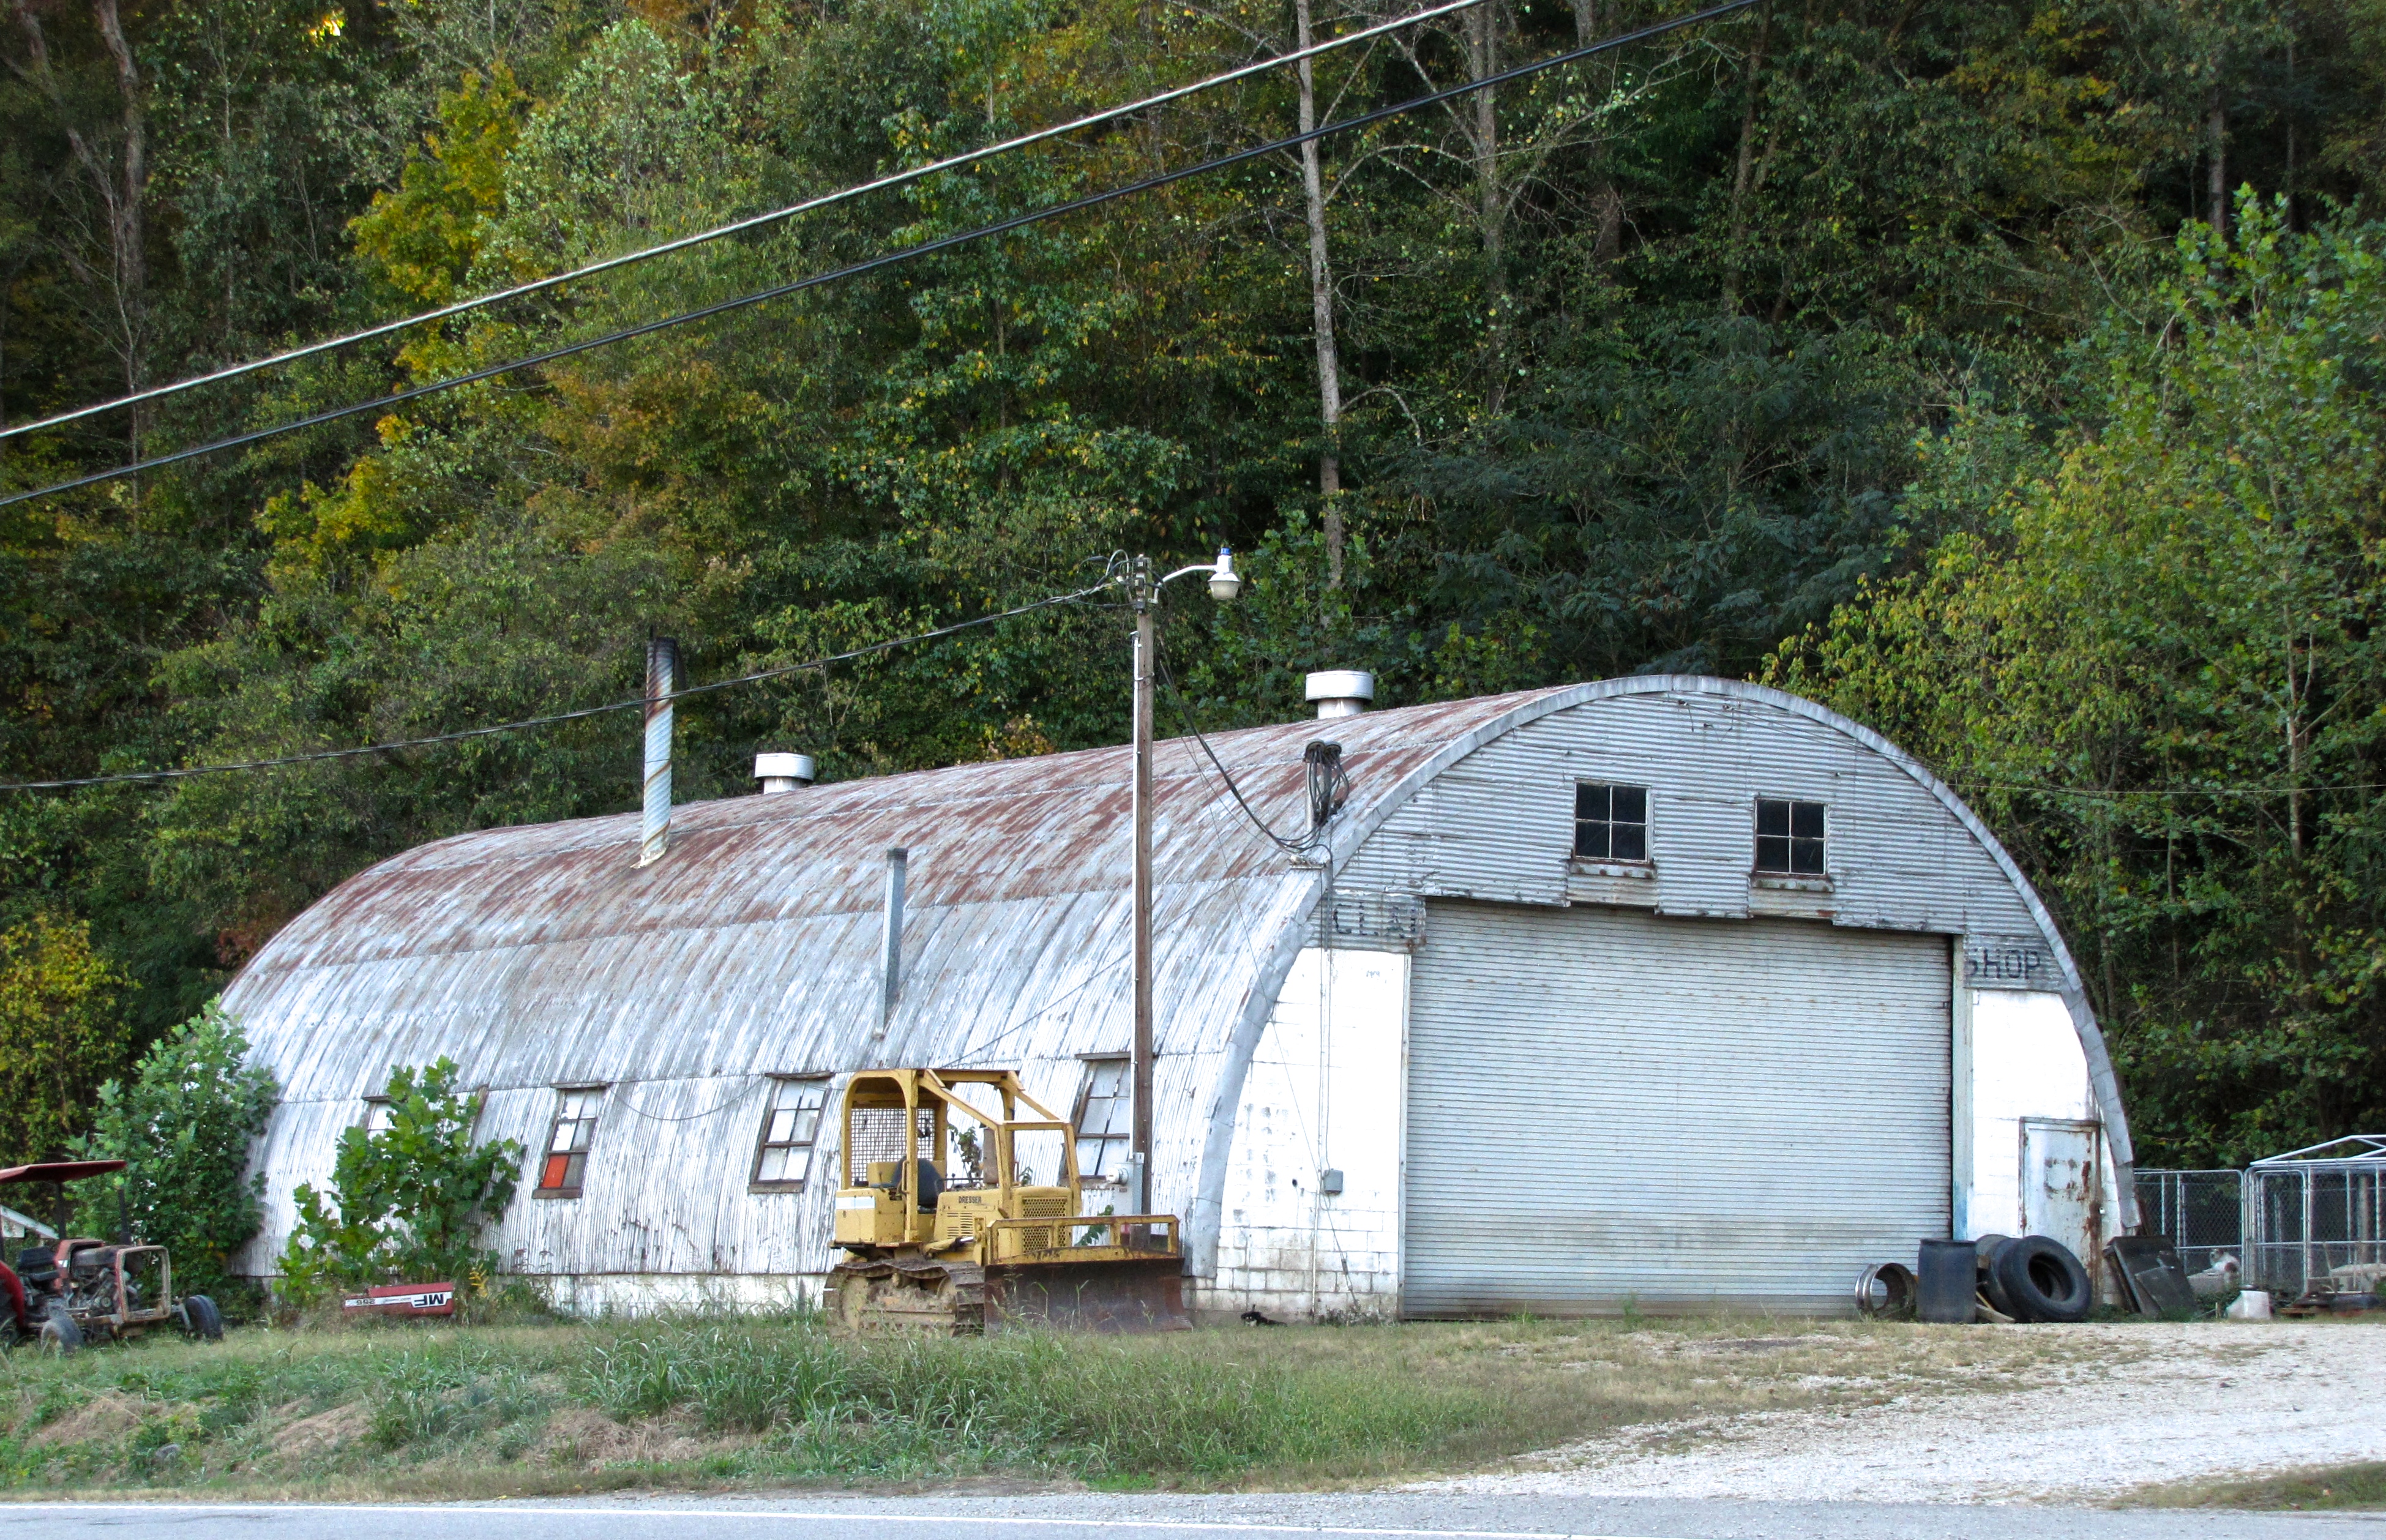 quonset hut in Green Bay, WI